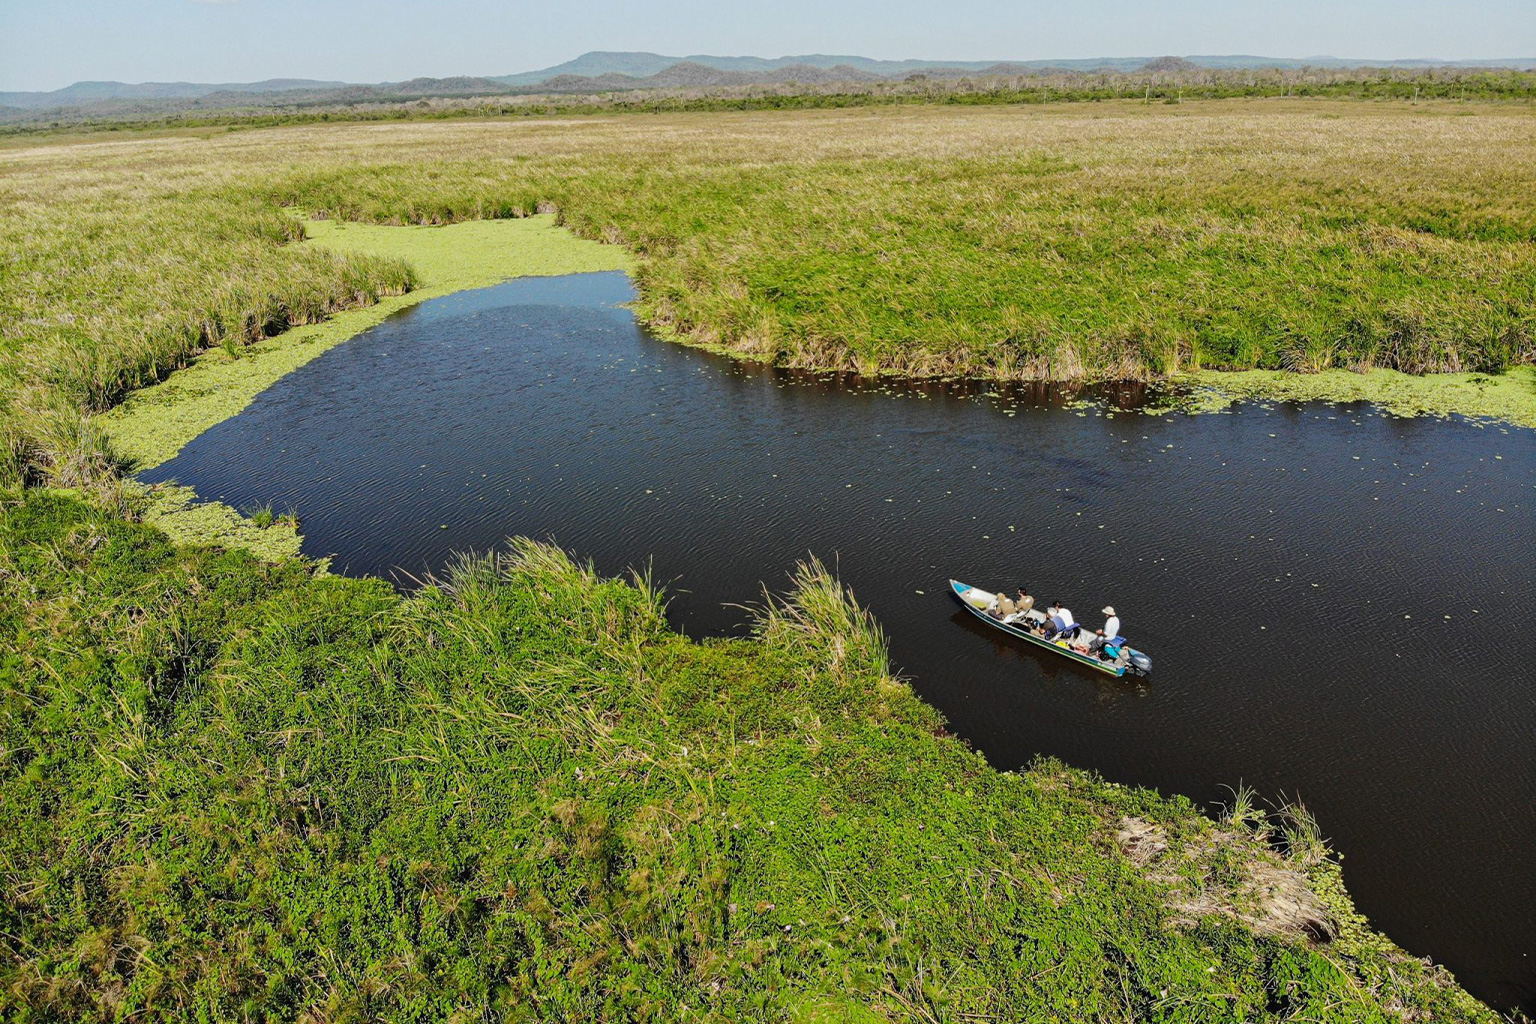 The Pantanal is the world’s largest tropical wetland.